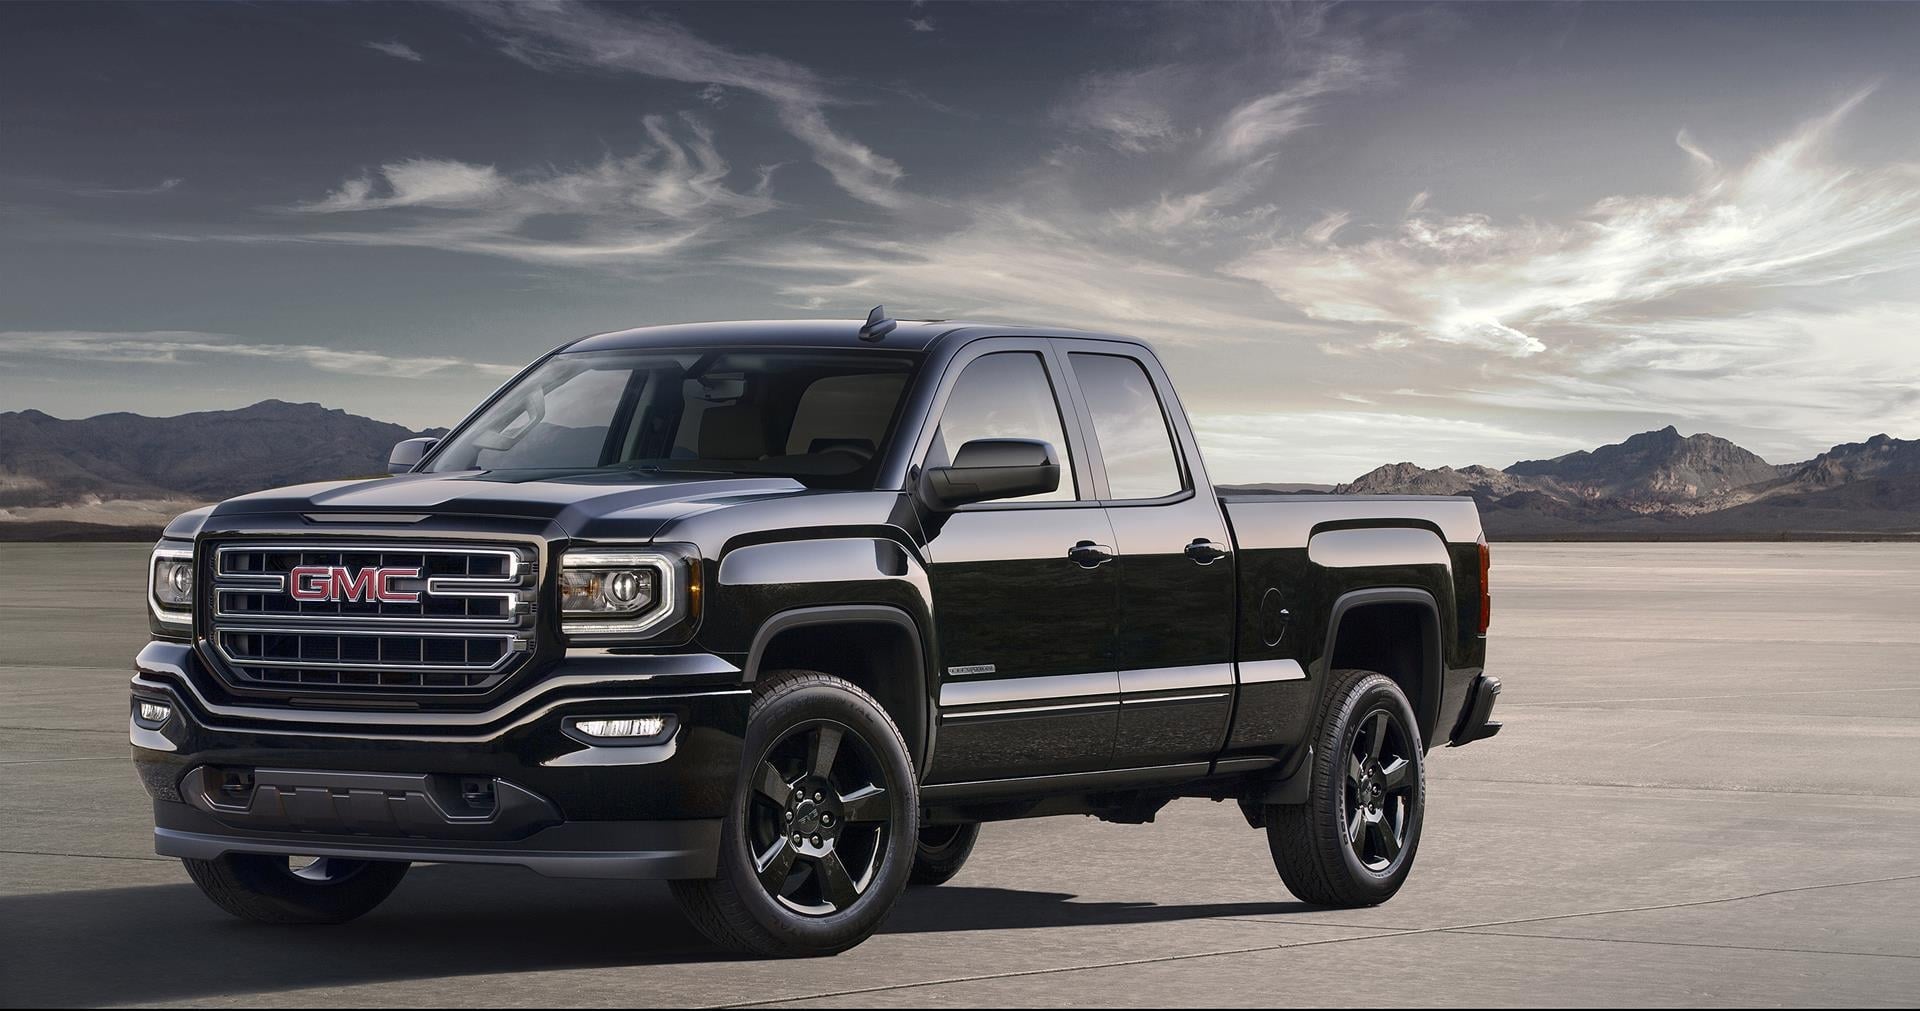 Gmc Sierra Wallpaper And Background Image